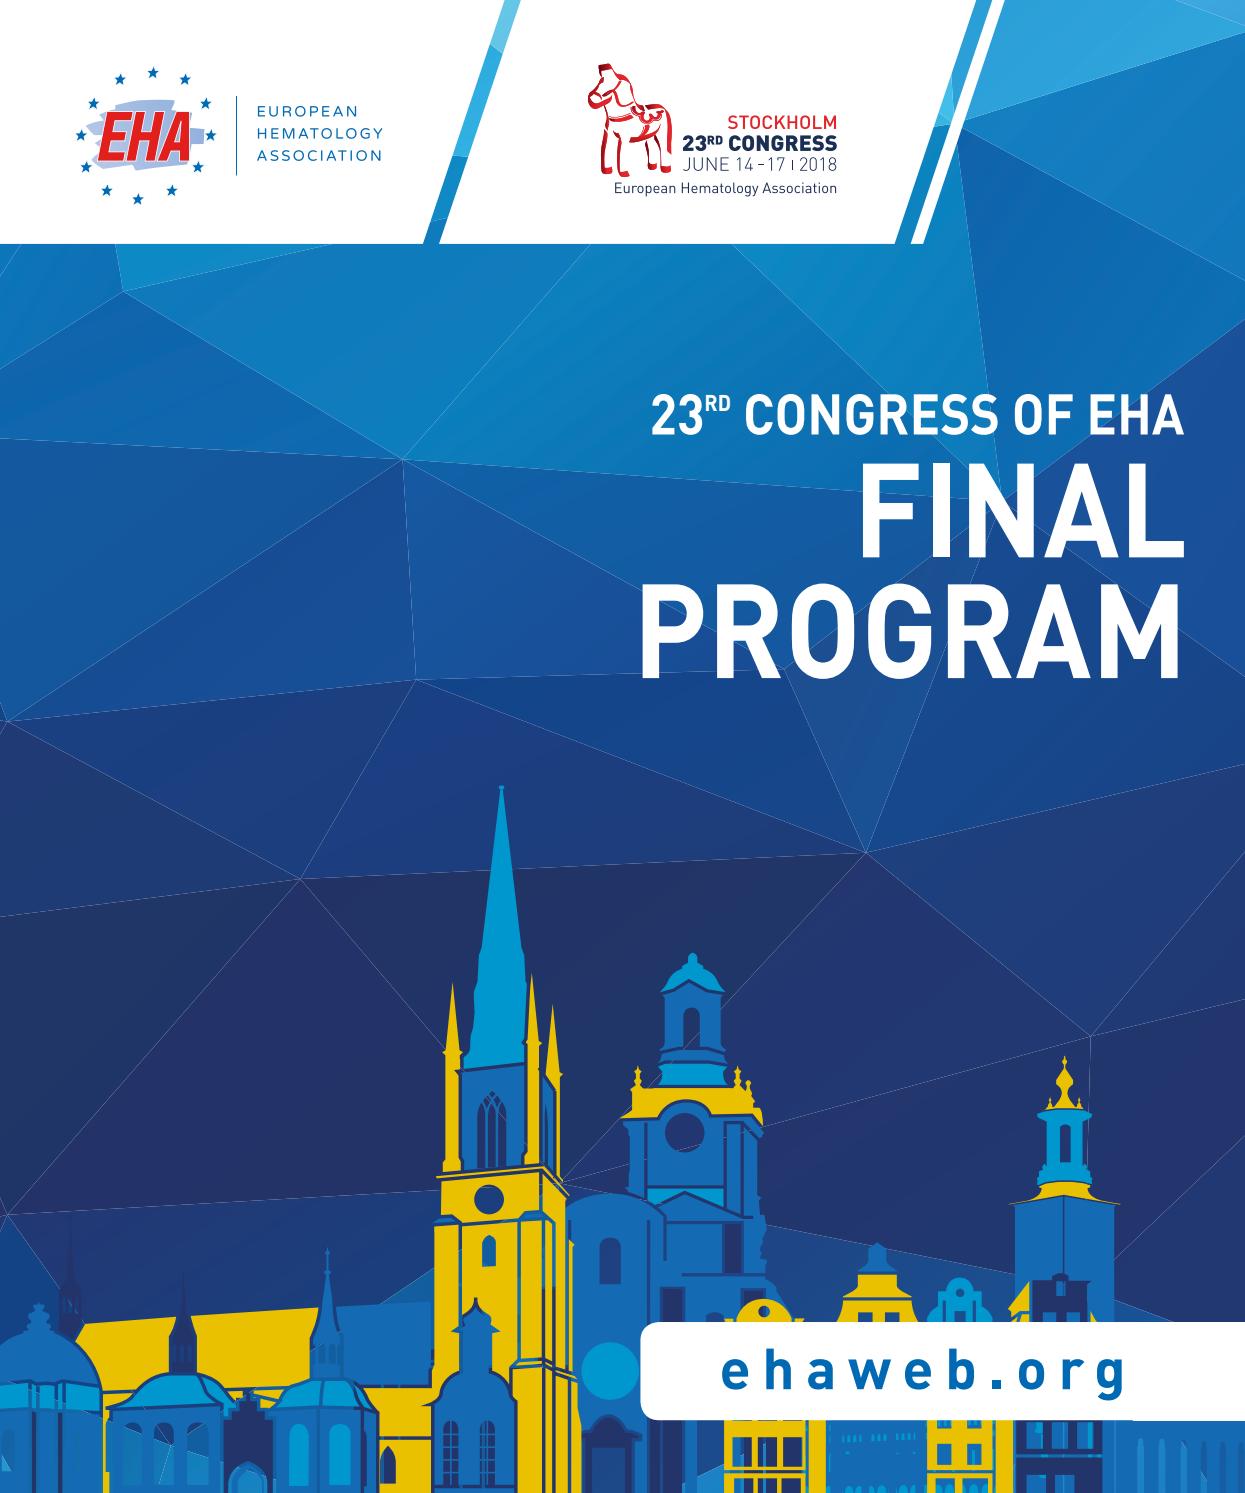 Magasin Canapé Angers Beau 23rd Congress Of Eha Final Program by Loyals issuu